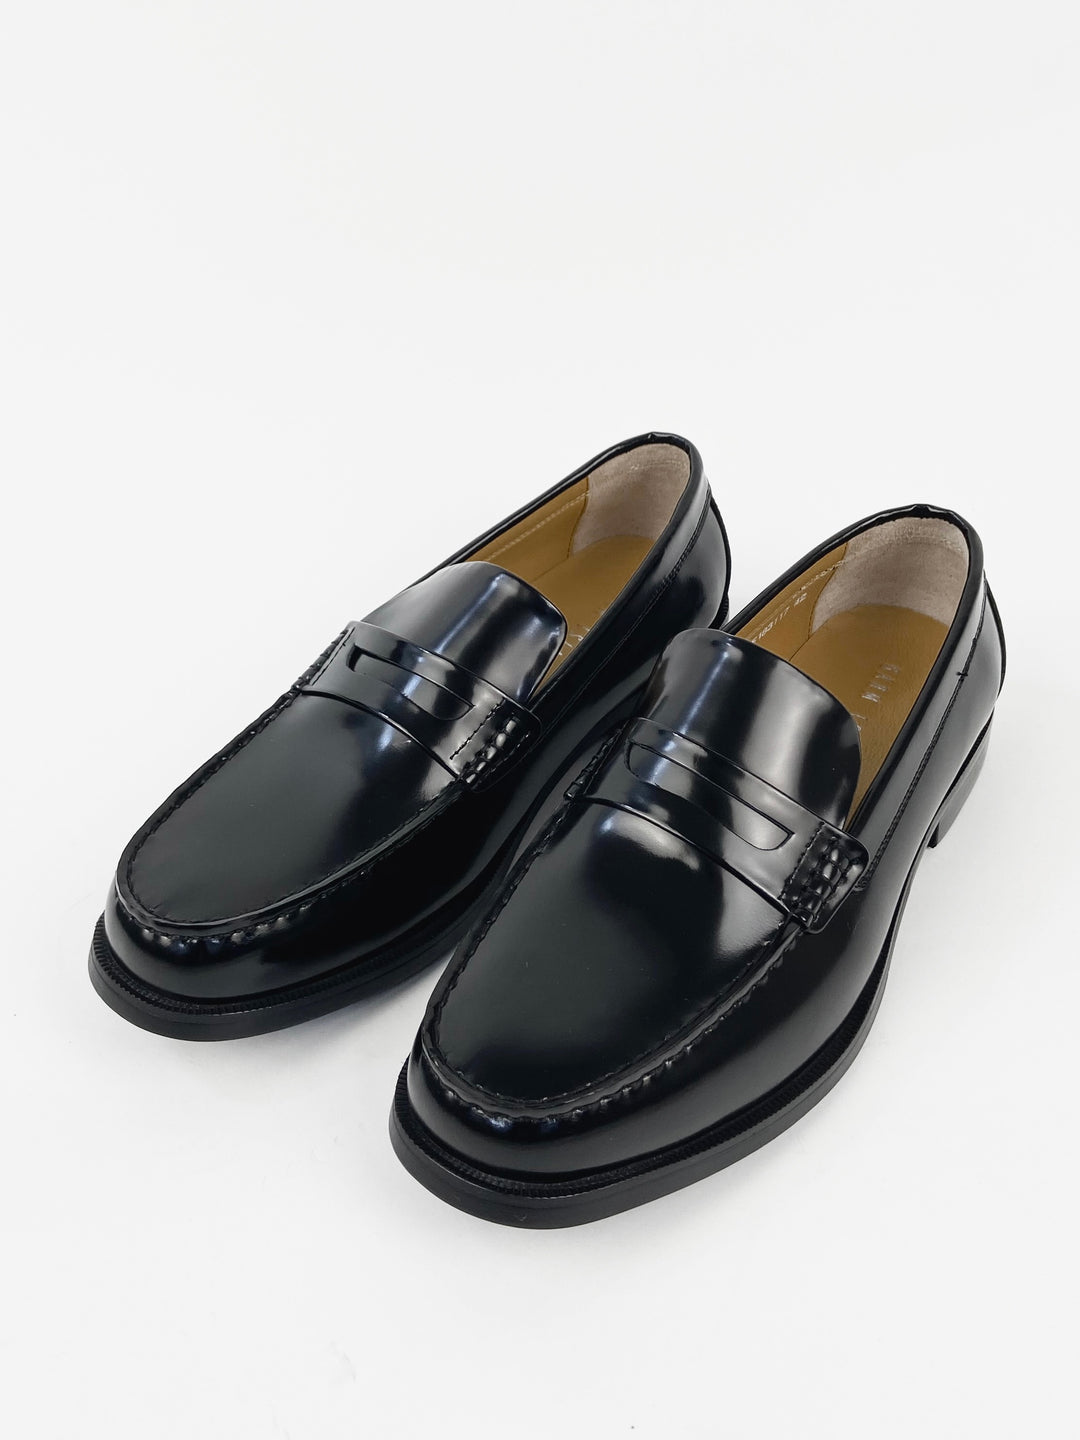 Garm Island Vintage Calf Leather Penny Loafers in black